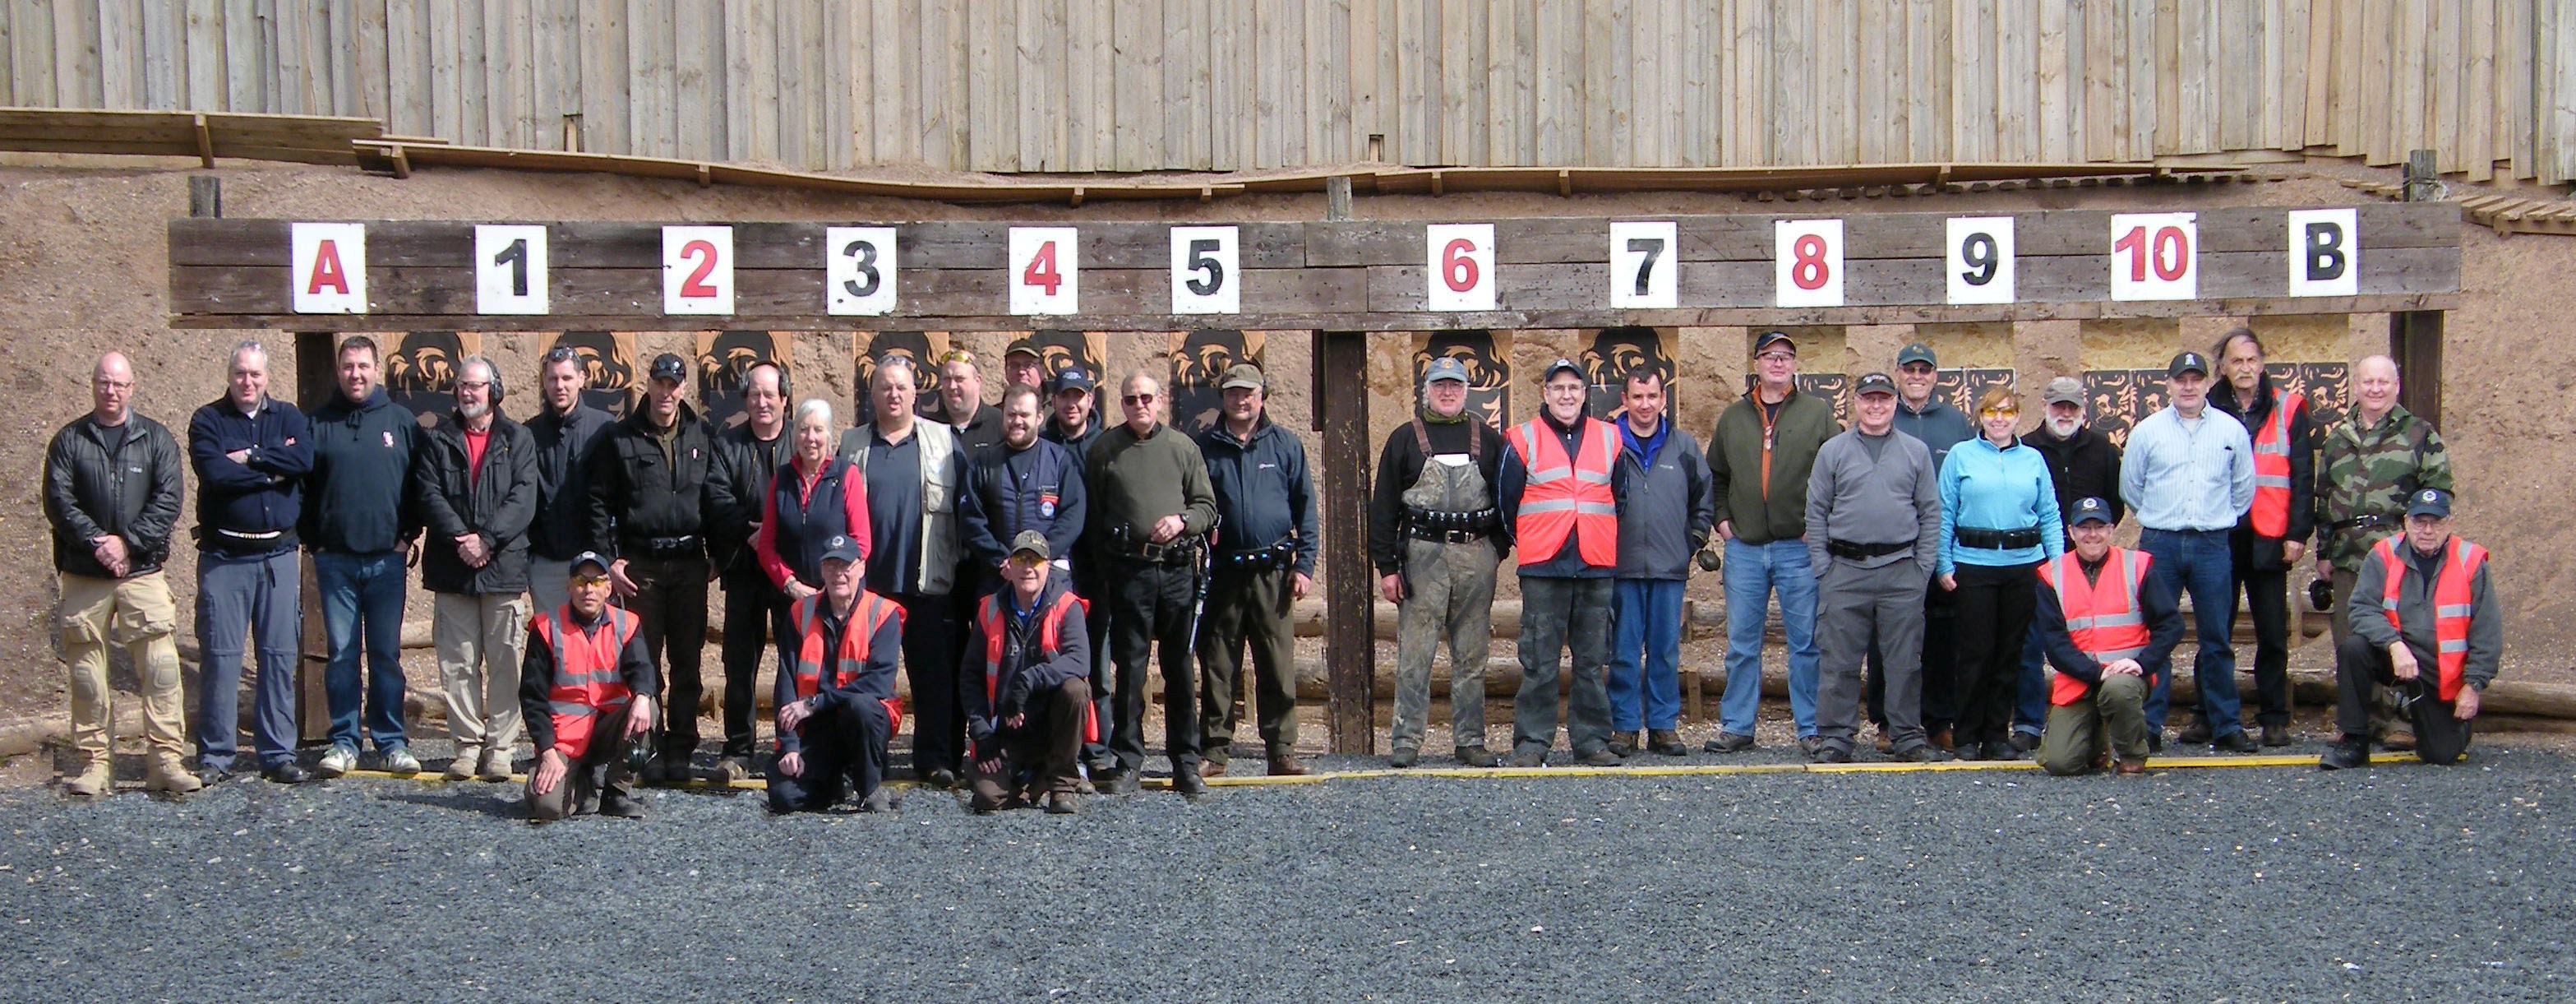 JOINT SERVICES PISTOL CLUB  OPEN COMPETITION: APRIL 2013